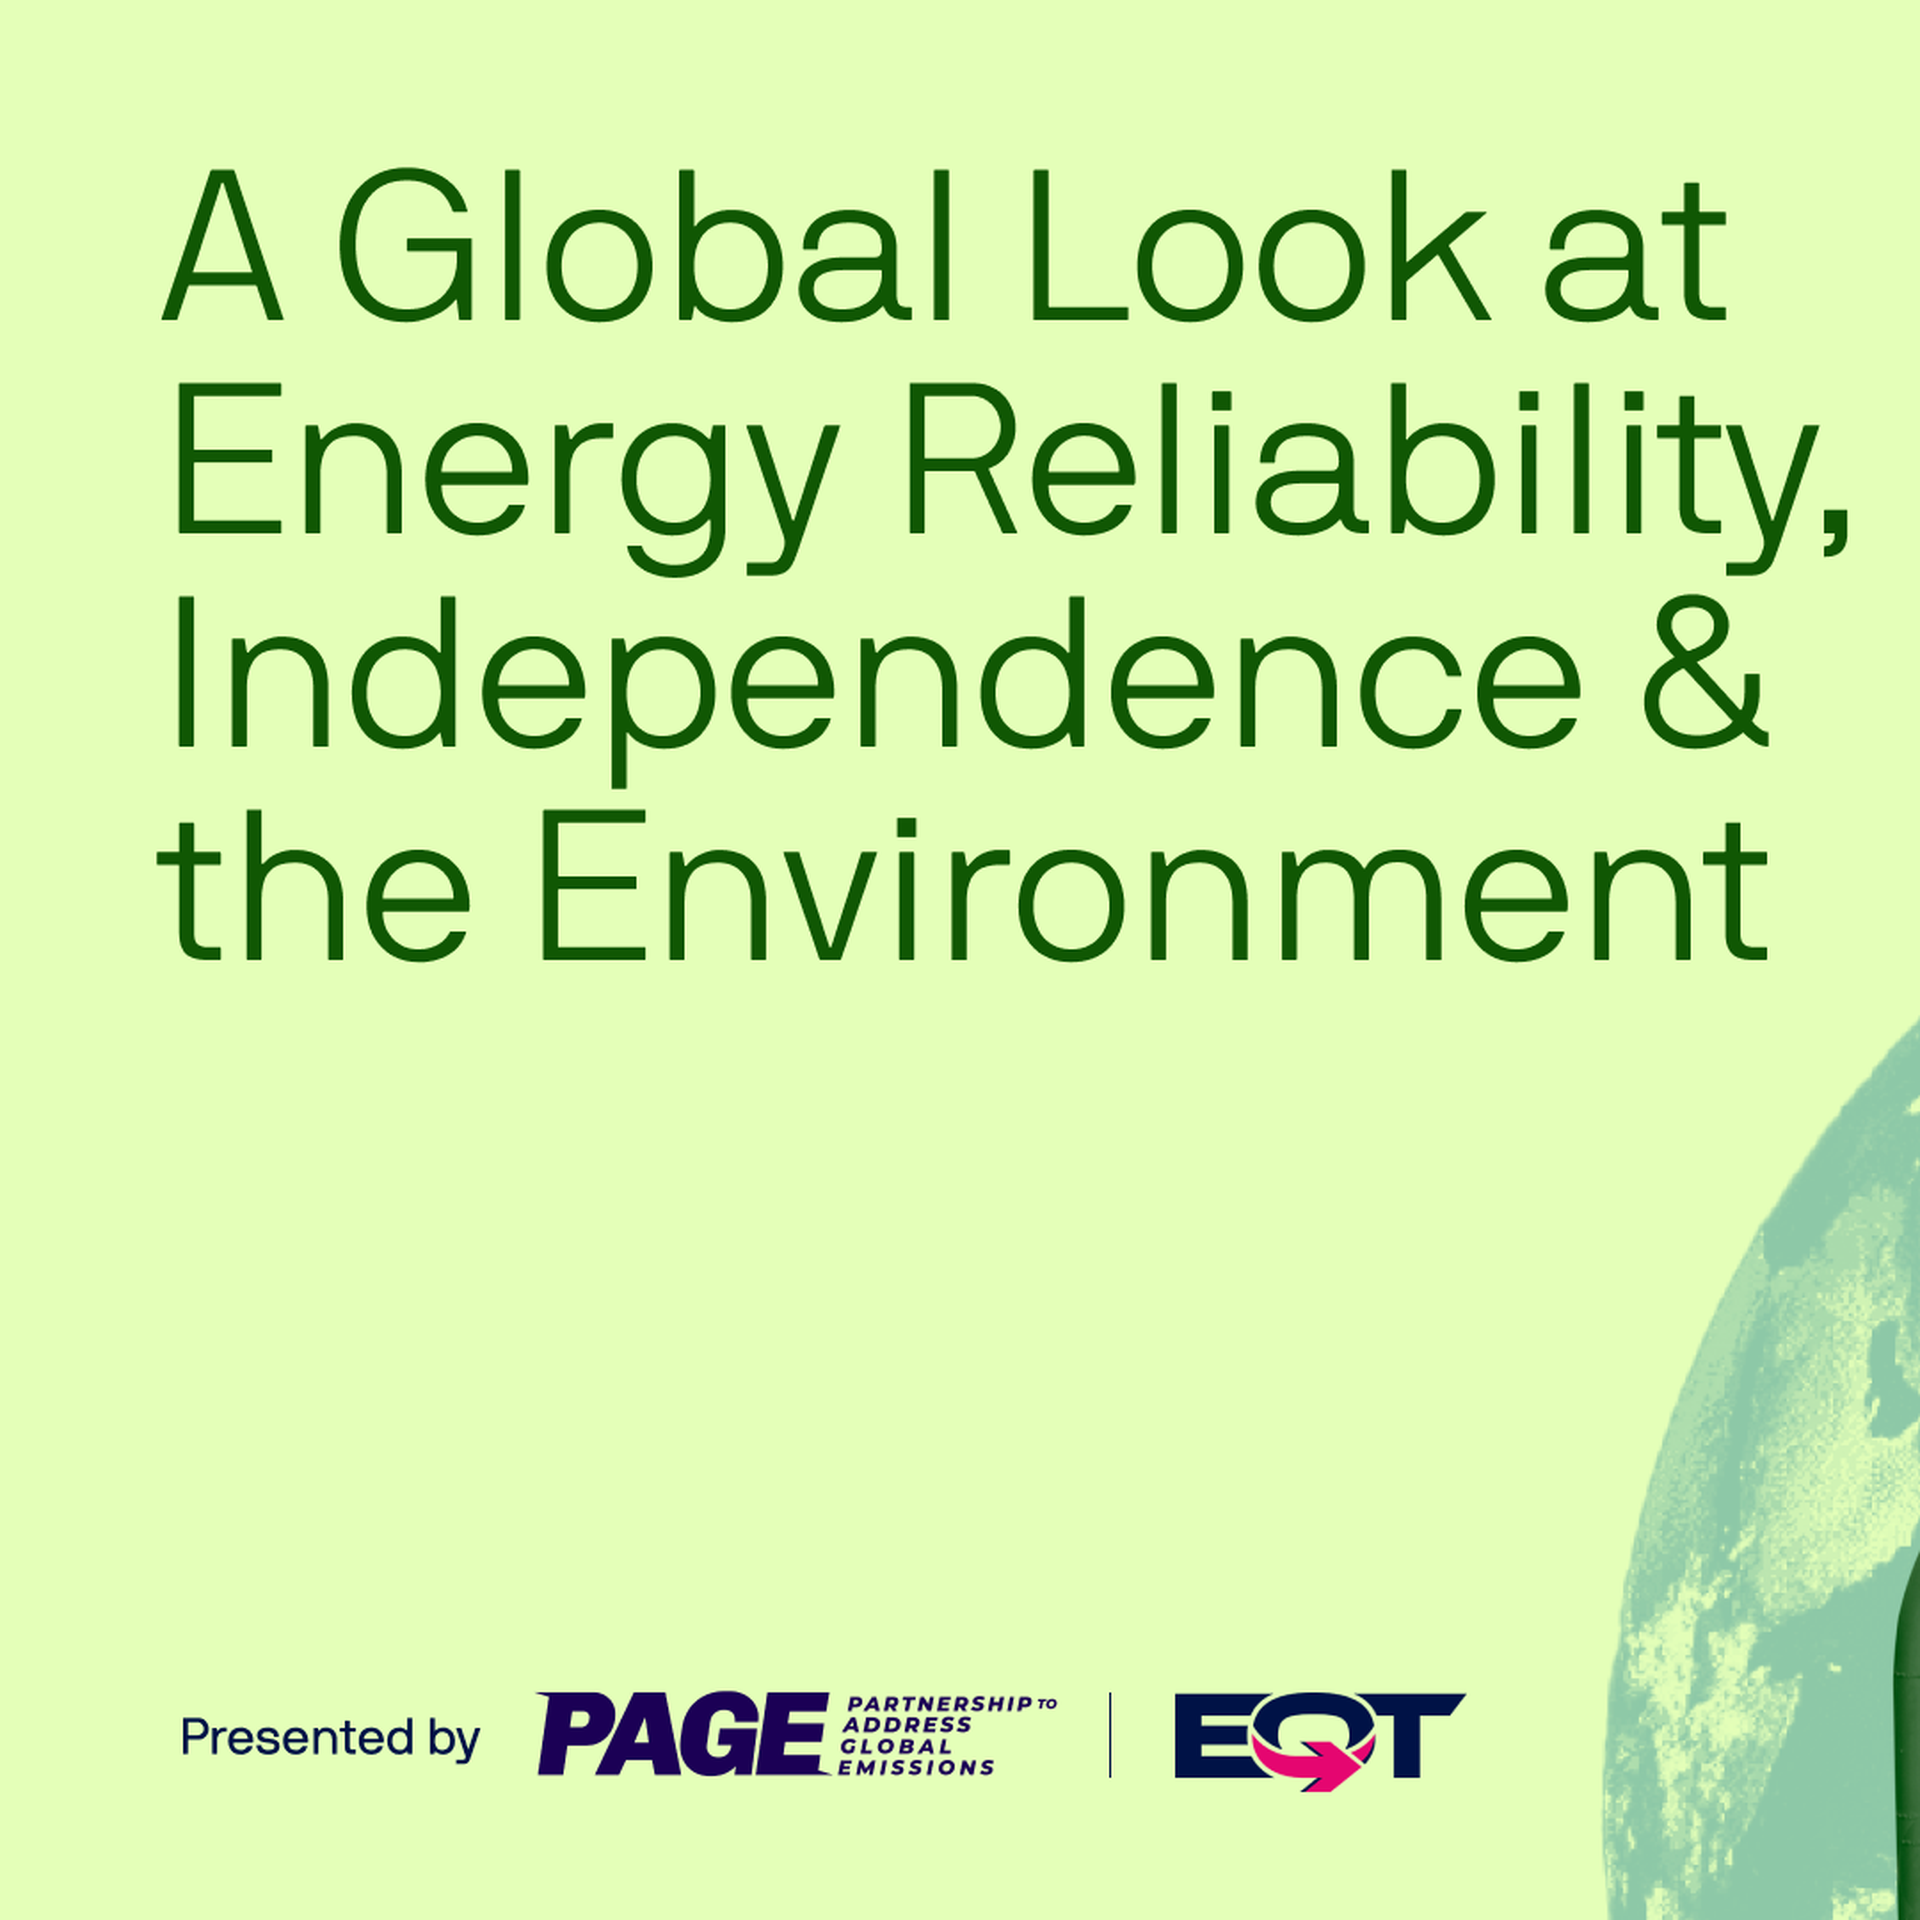 A Global Look at Energy Reliability, Independence & the Environment